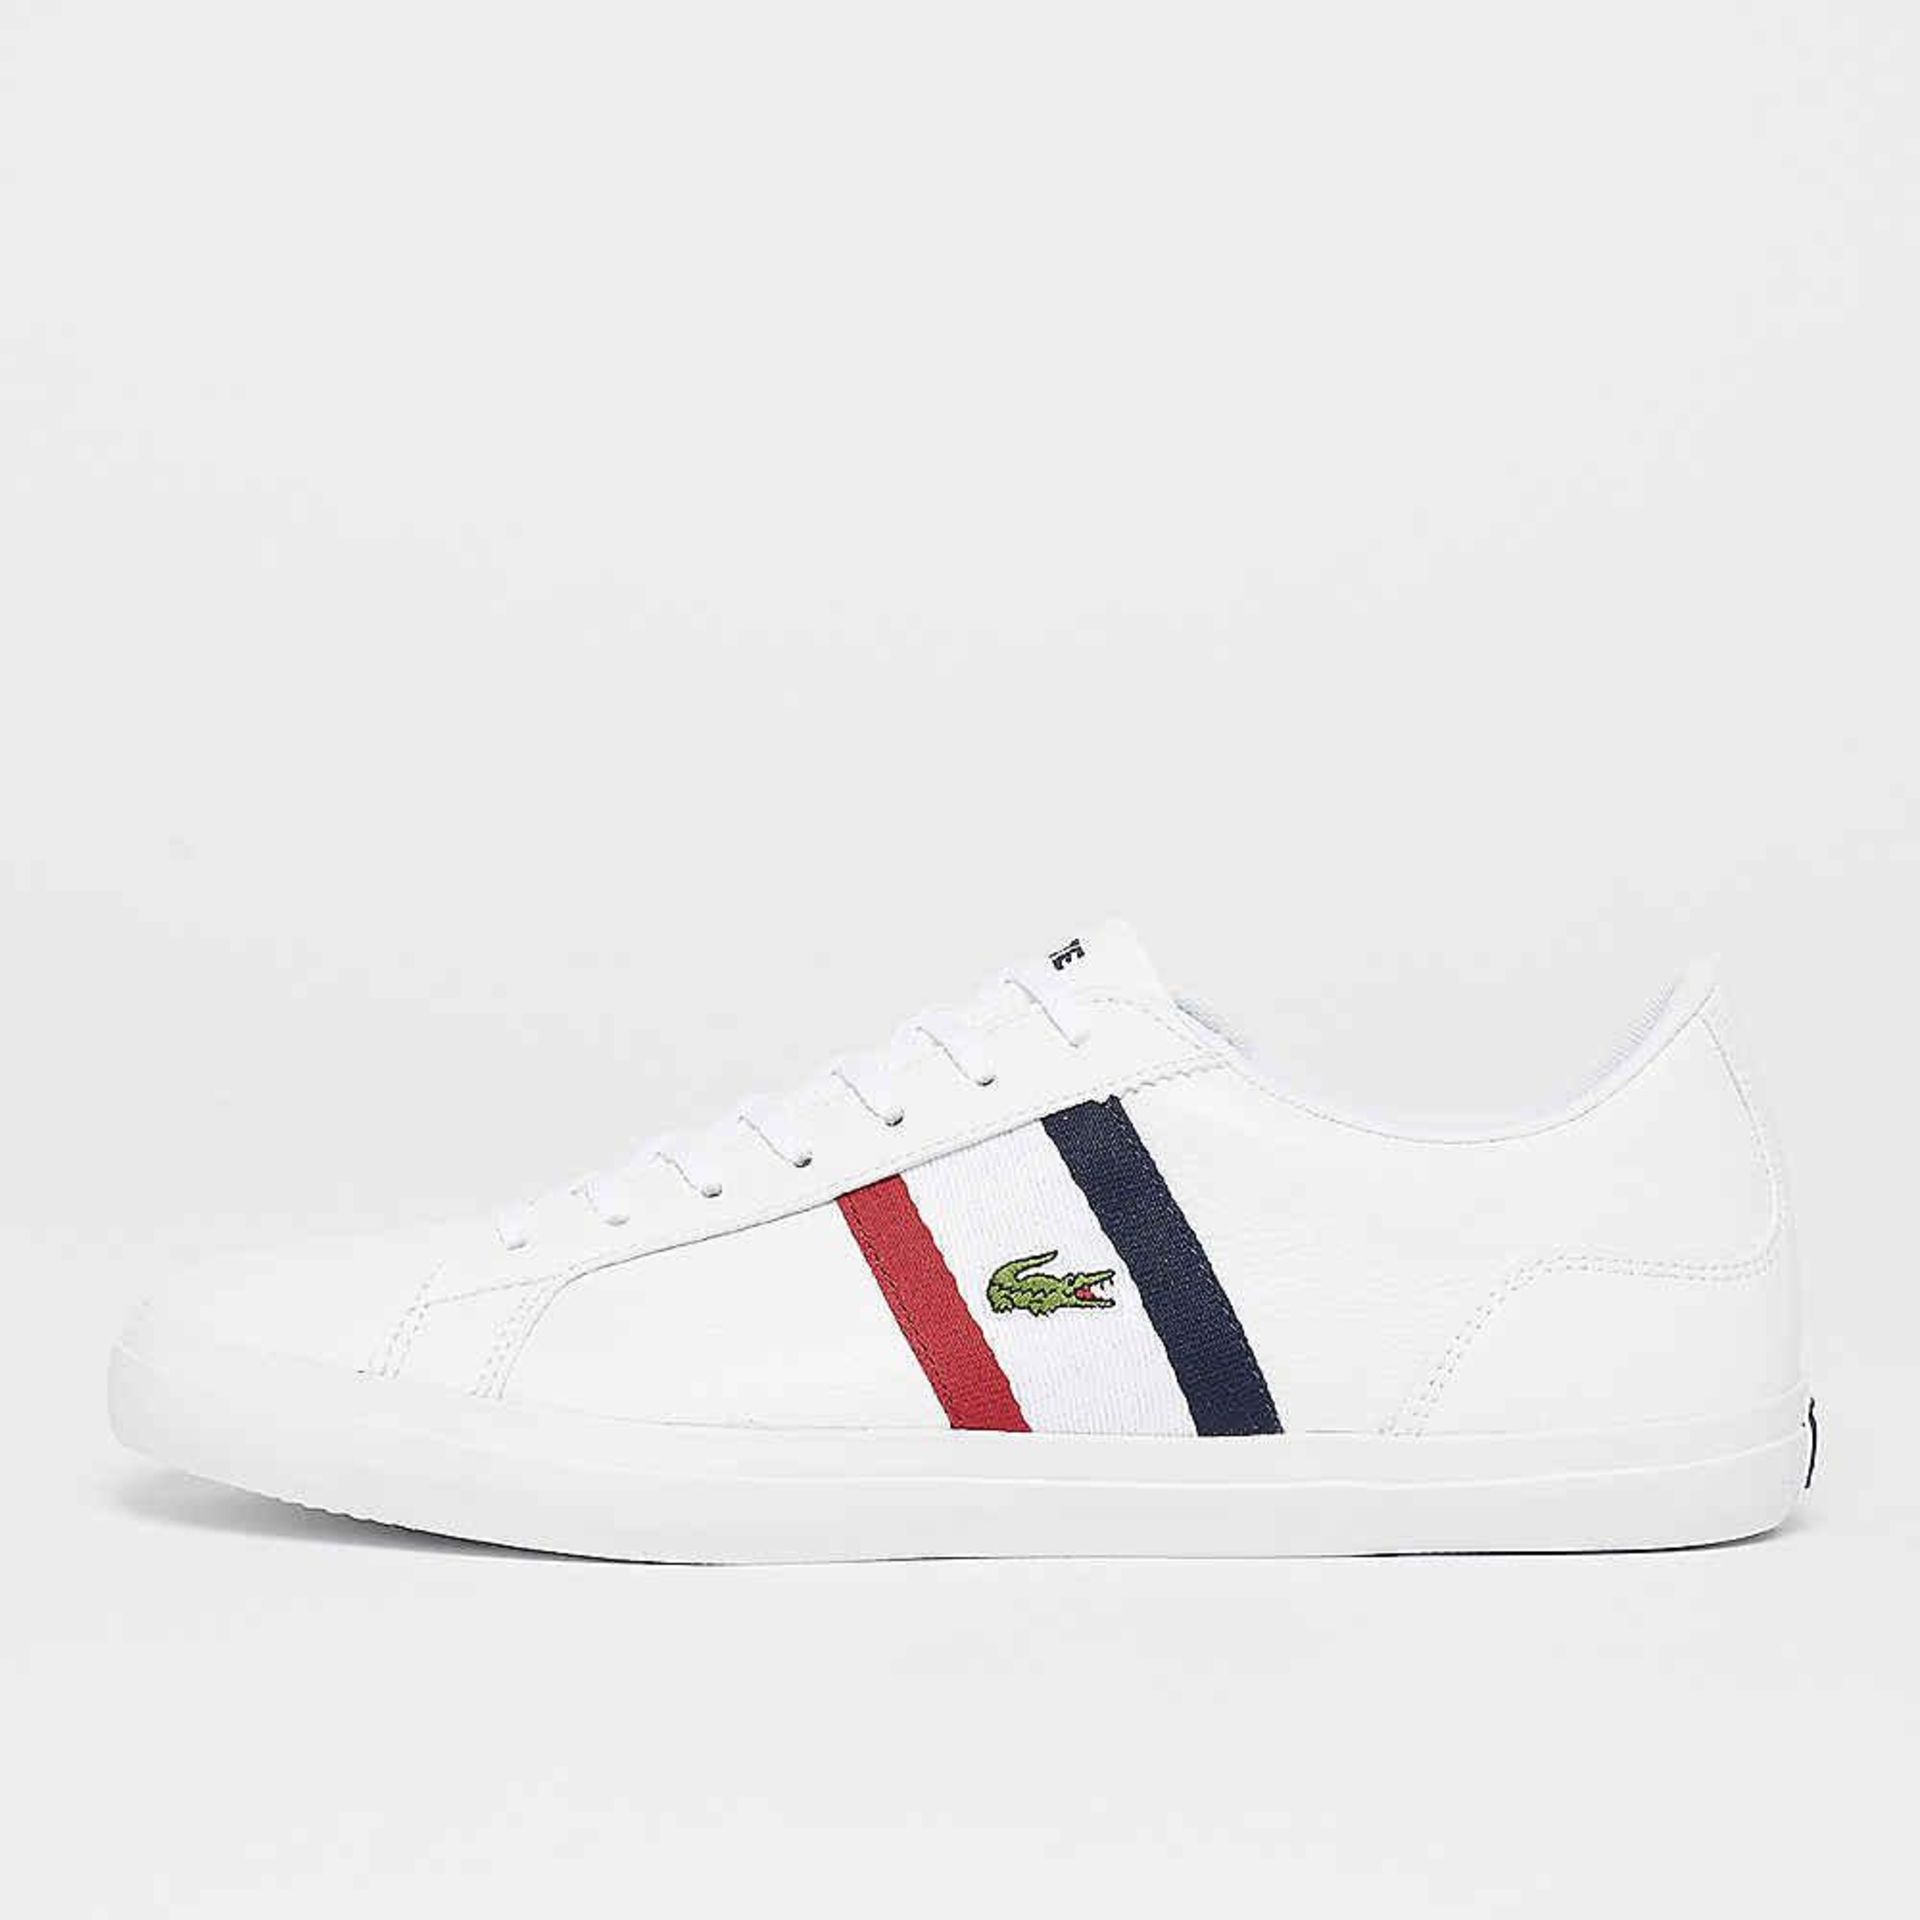 + VAT Brand New Lacoste Trainers UK Size 10.5 - White Red Navy - Leather and Synthetic - EU Size 45